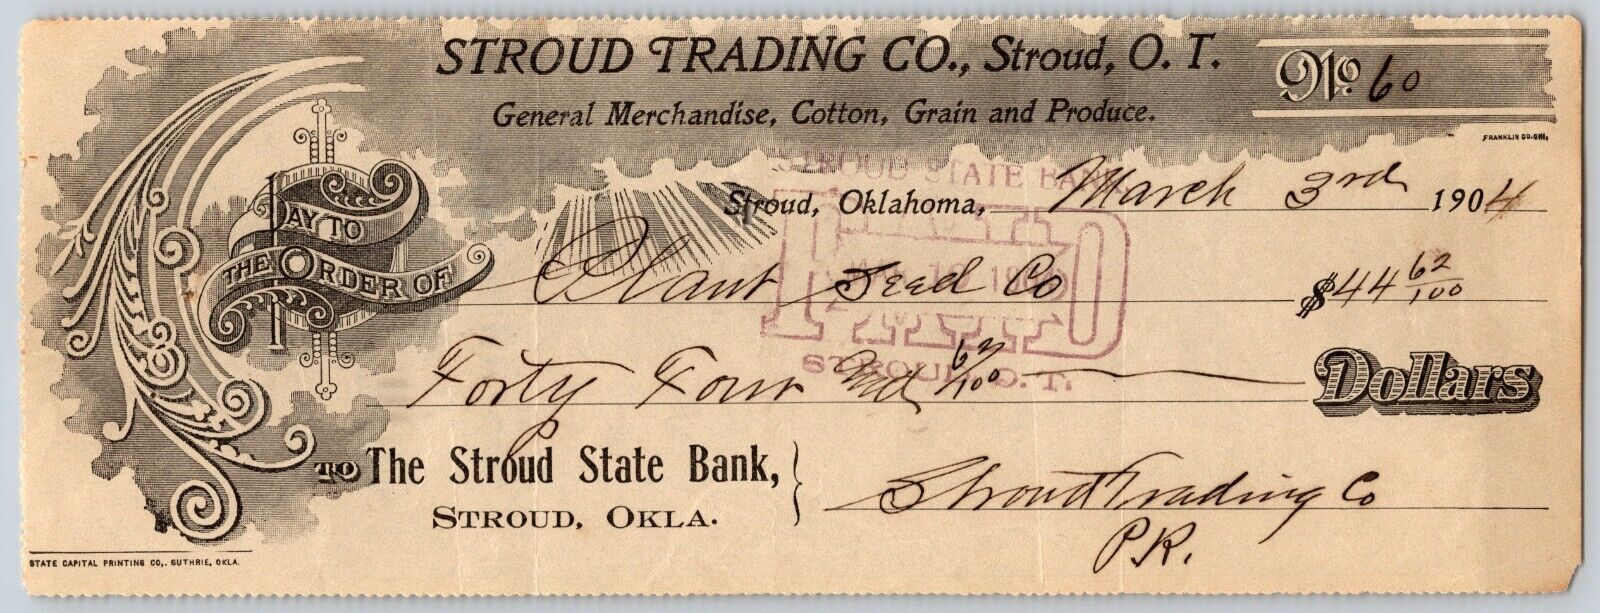 Stroud Trading Co. / Plant Seed Co. Oklahoma Territory 1904 Bank Check